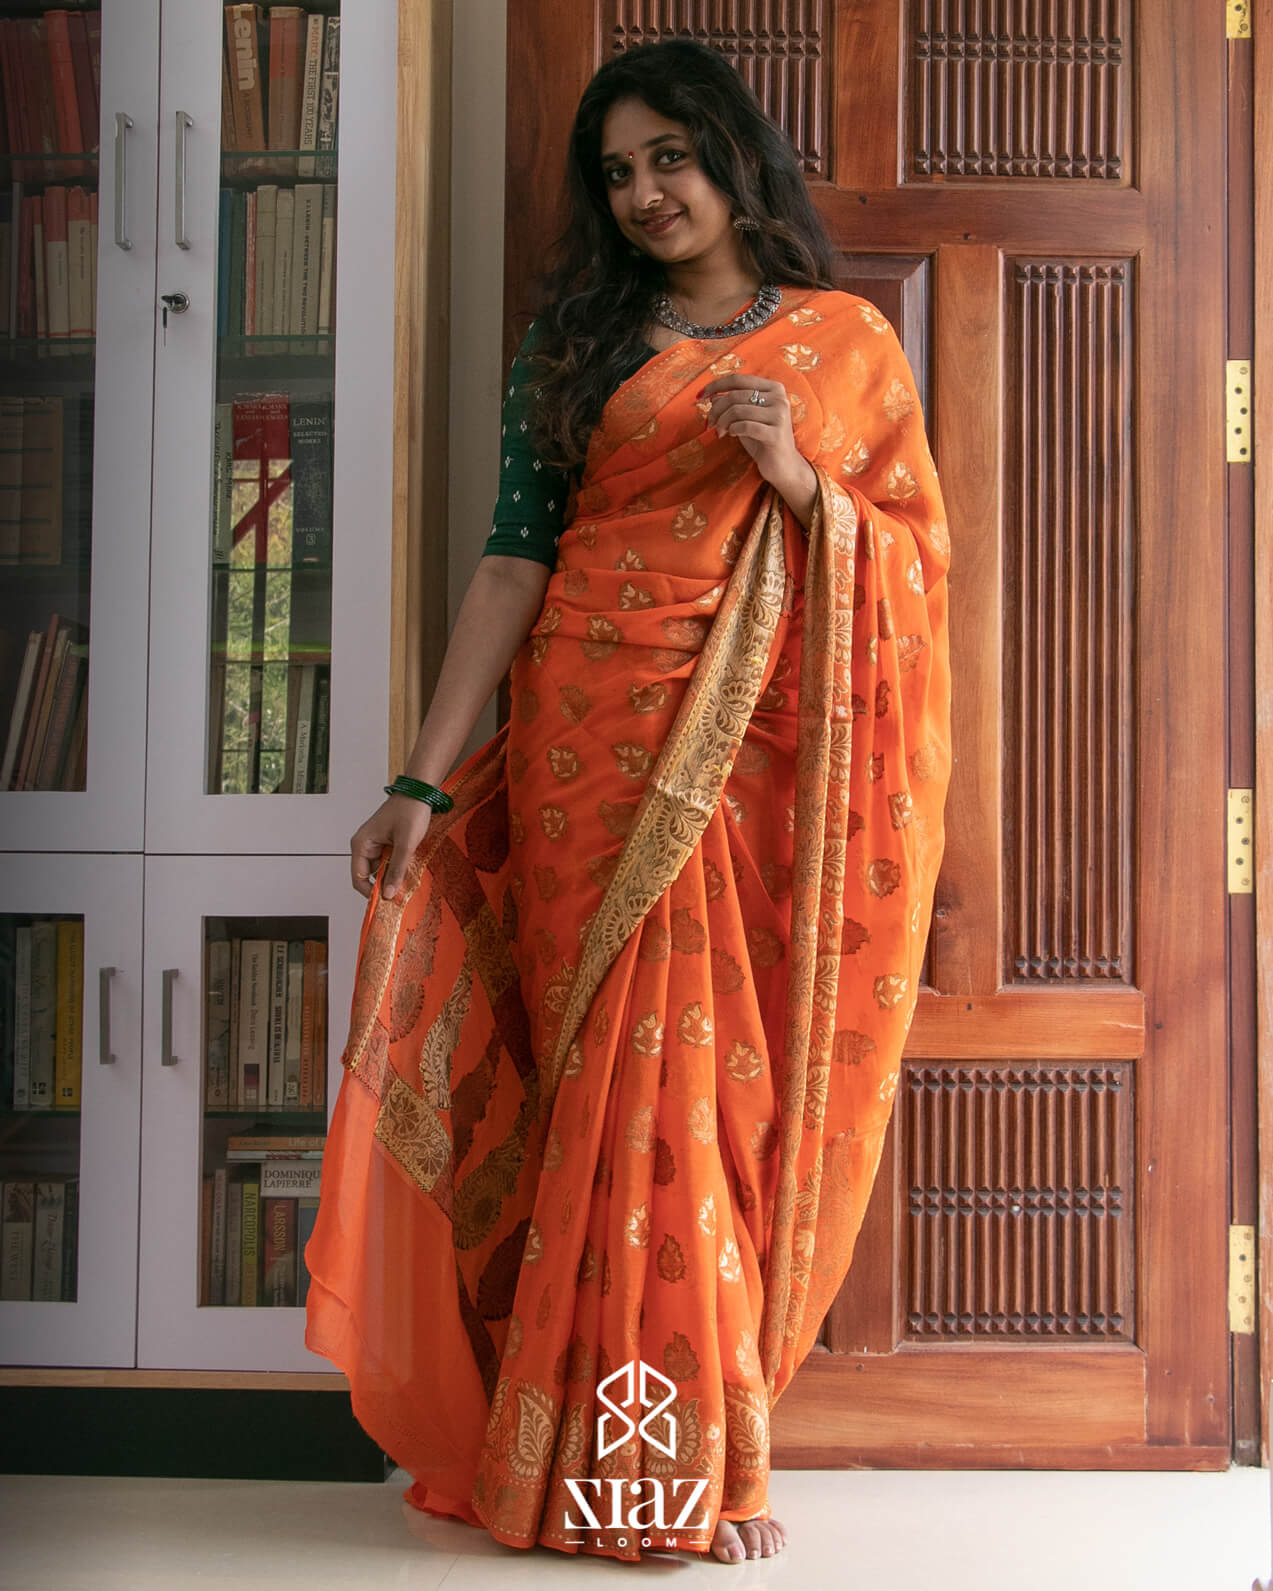 Kangana Ranaut Looks Like A 'Husnpari' In Orange-Colored Banarasi Silk Saree  As She Takes Her Ethnic 'Fashion' A Notch Higher - Ladies, Take Notes On  How To Make Hubby Drool Over Your '